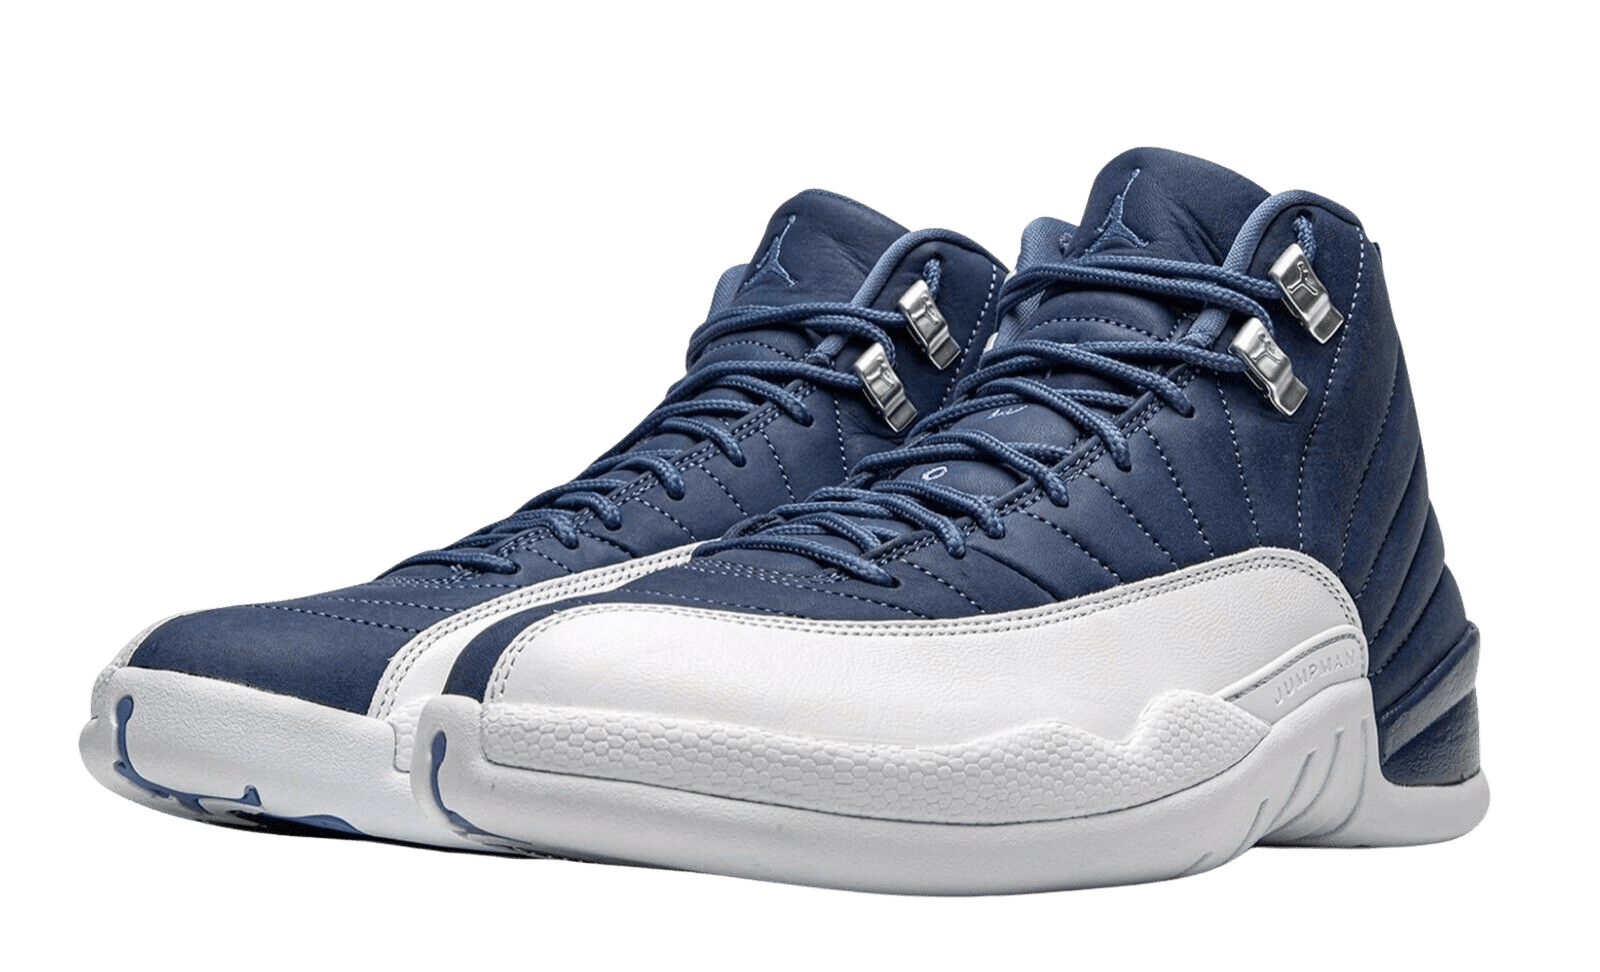 Everything You Need to Know About Blue Air Jordan 12s | eBay